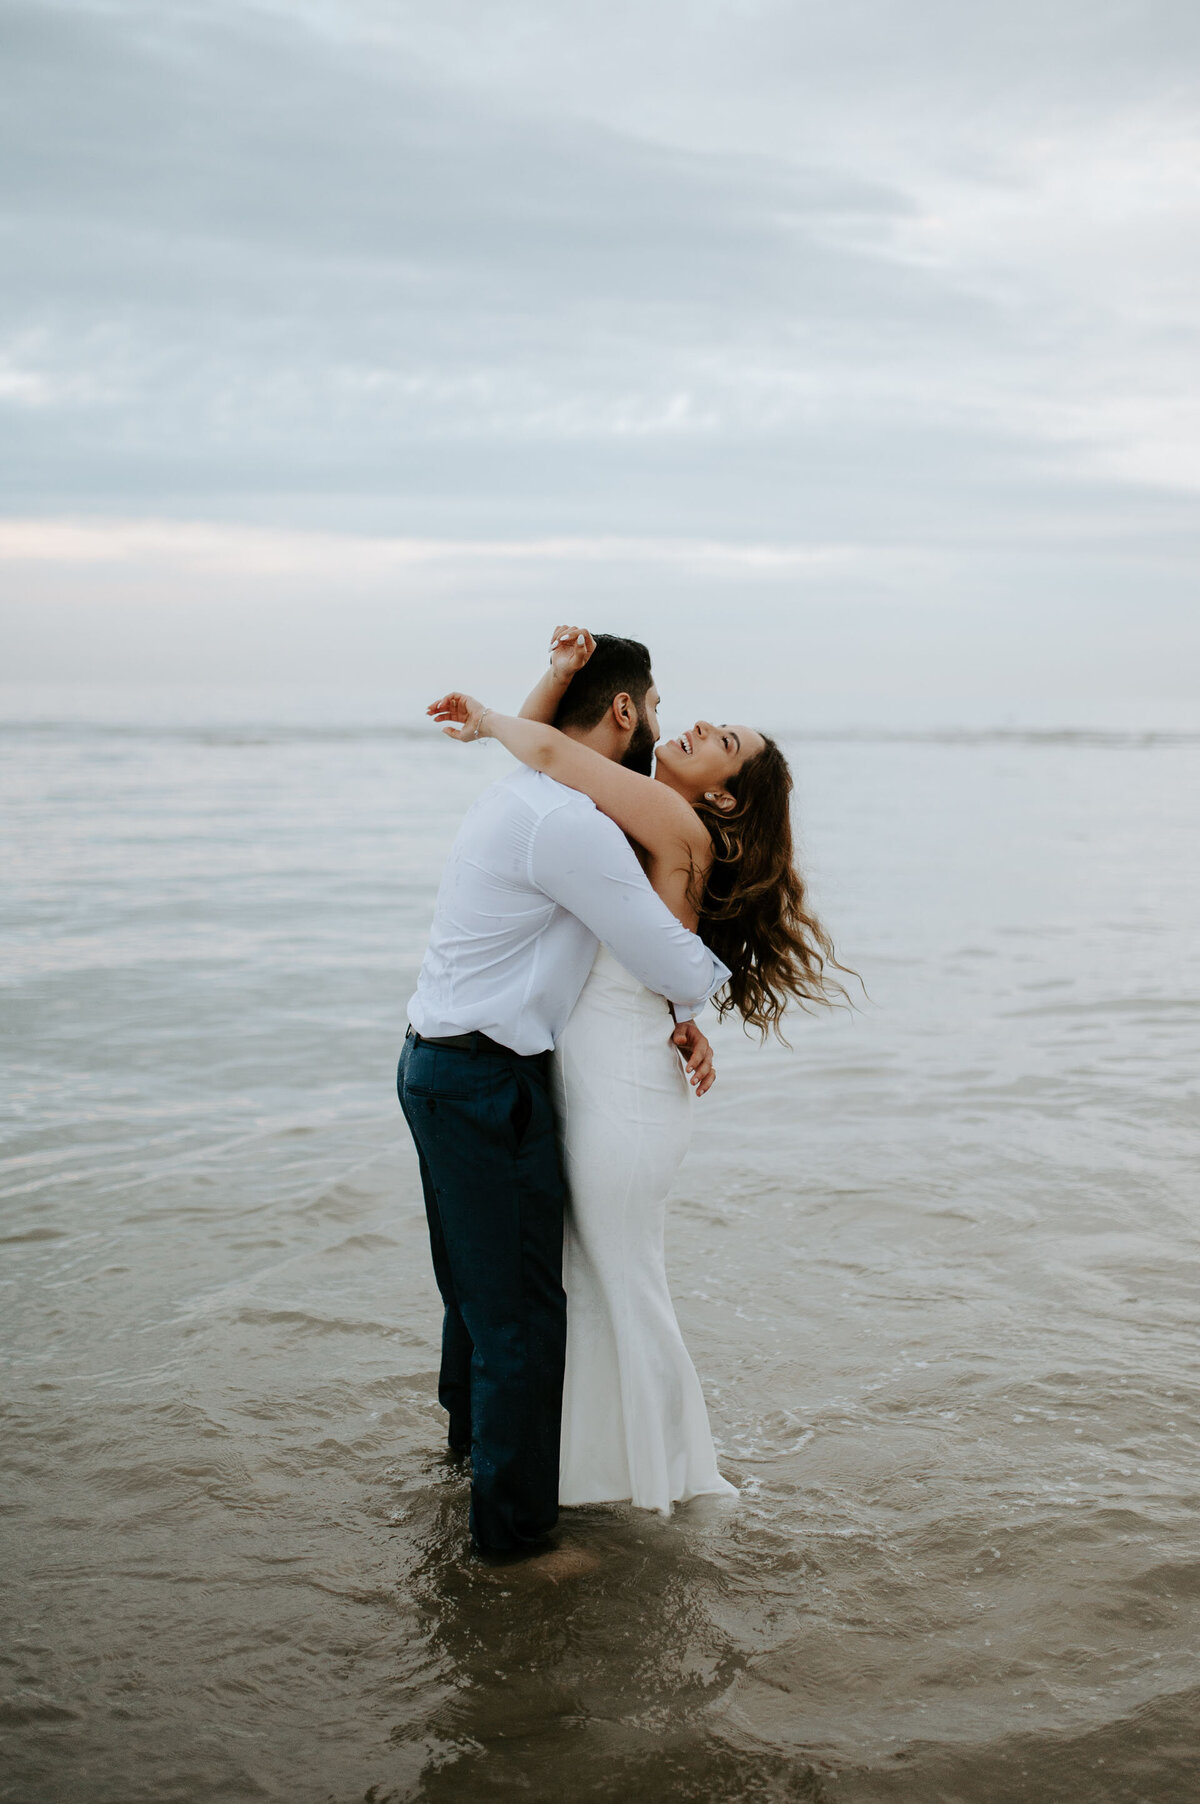 Demiana and Goergeuos - Beach Shoot - 2.6.21 - Laura Williams Photography  - 158